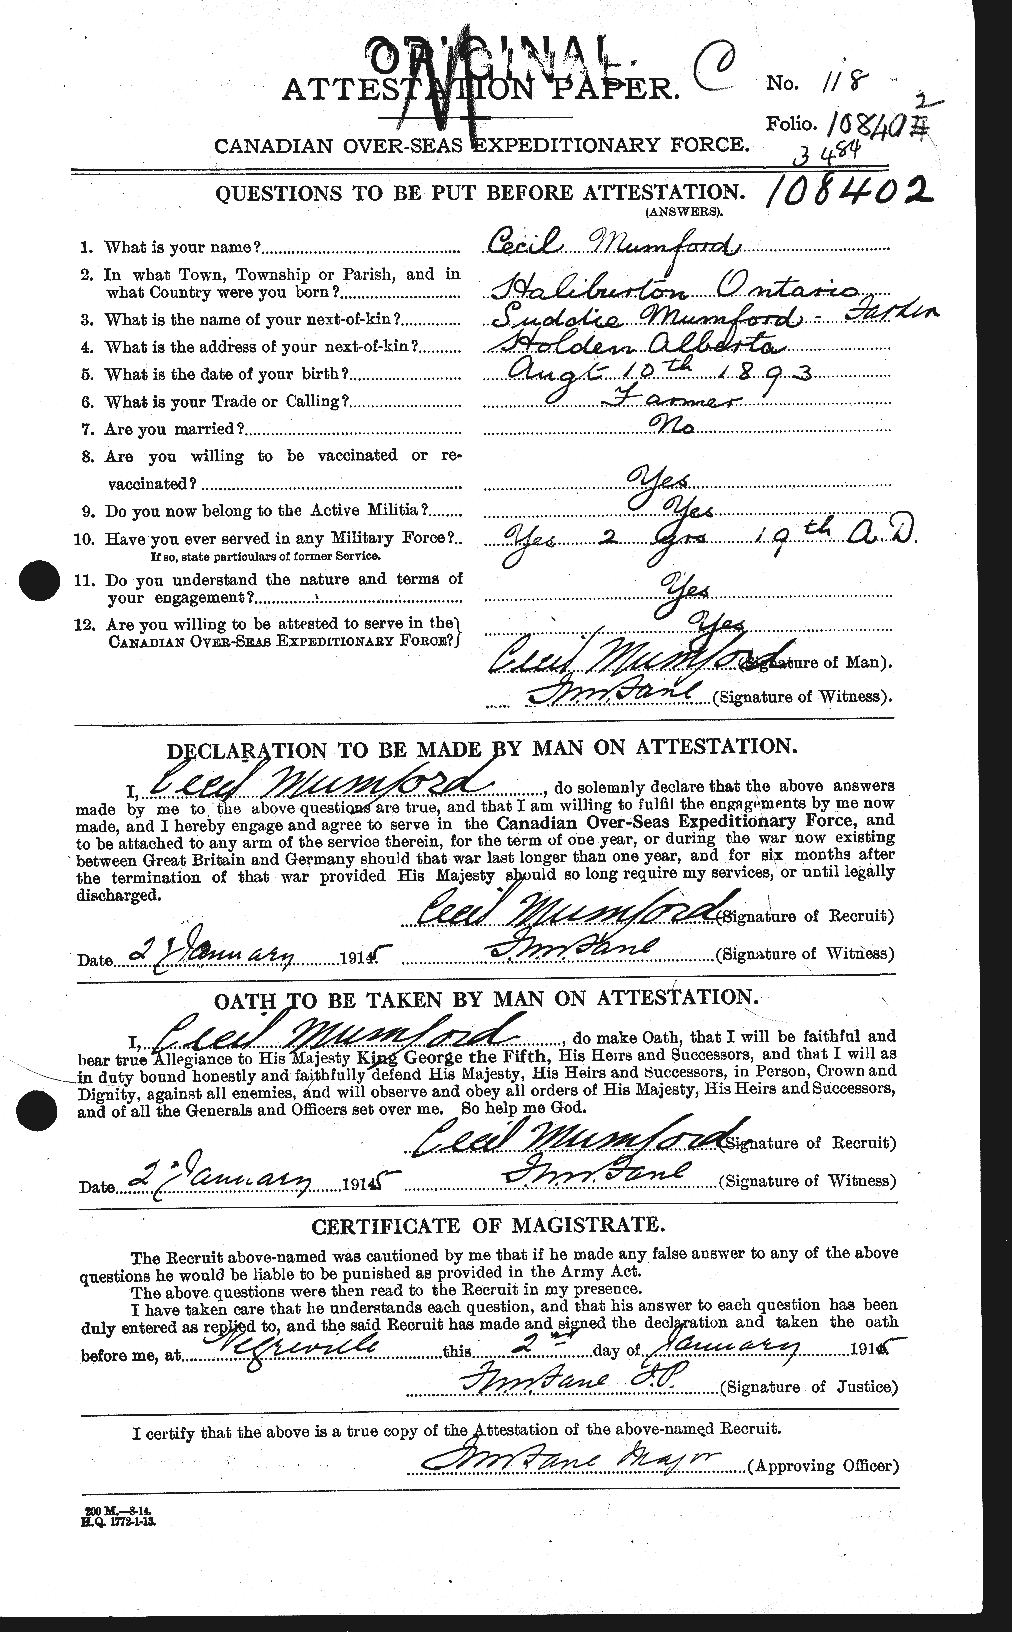 Personnel Records of the First World War - CEF 513621a